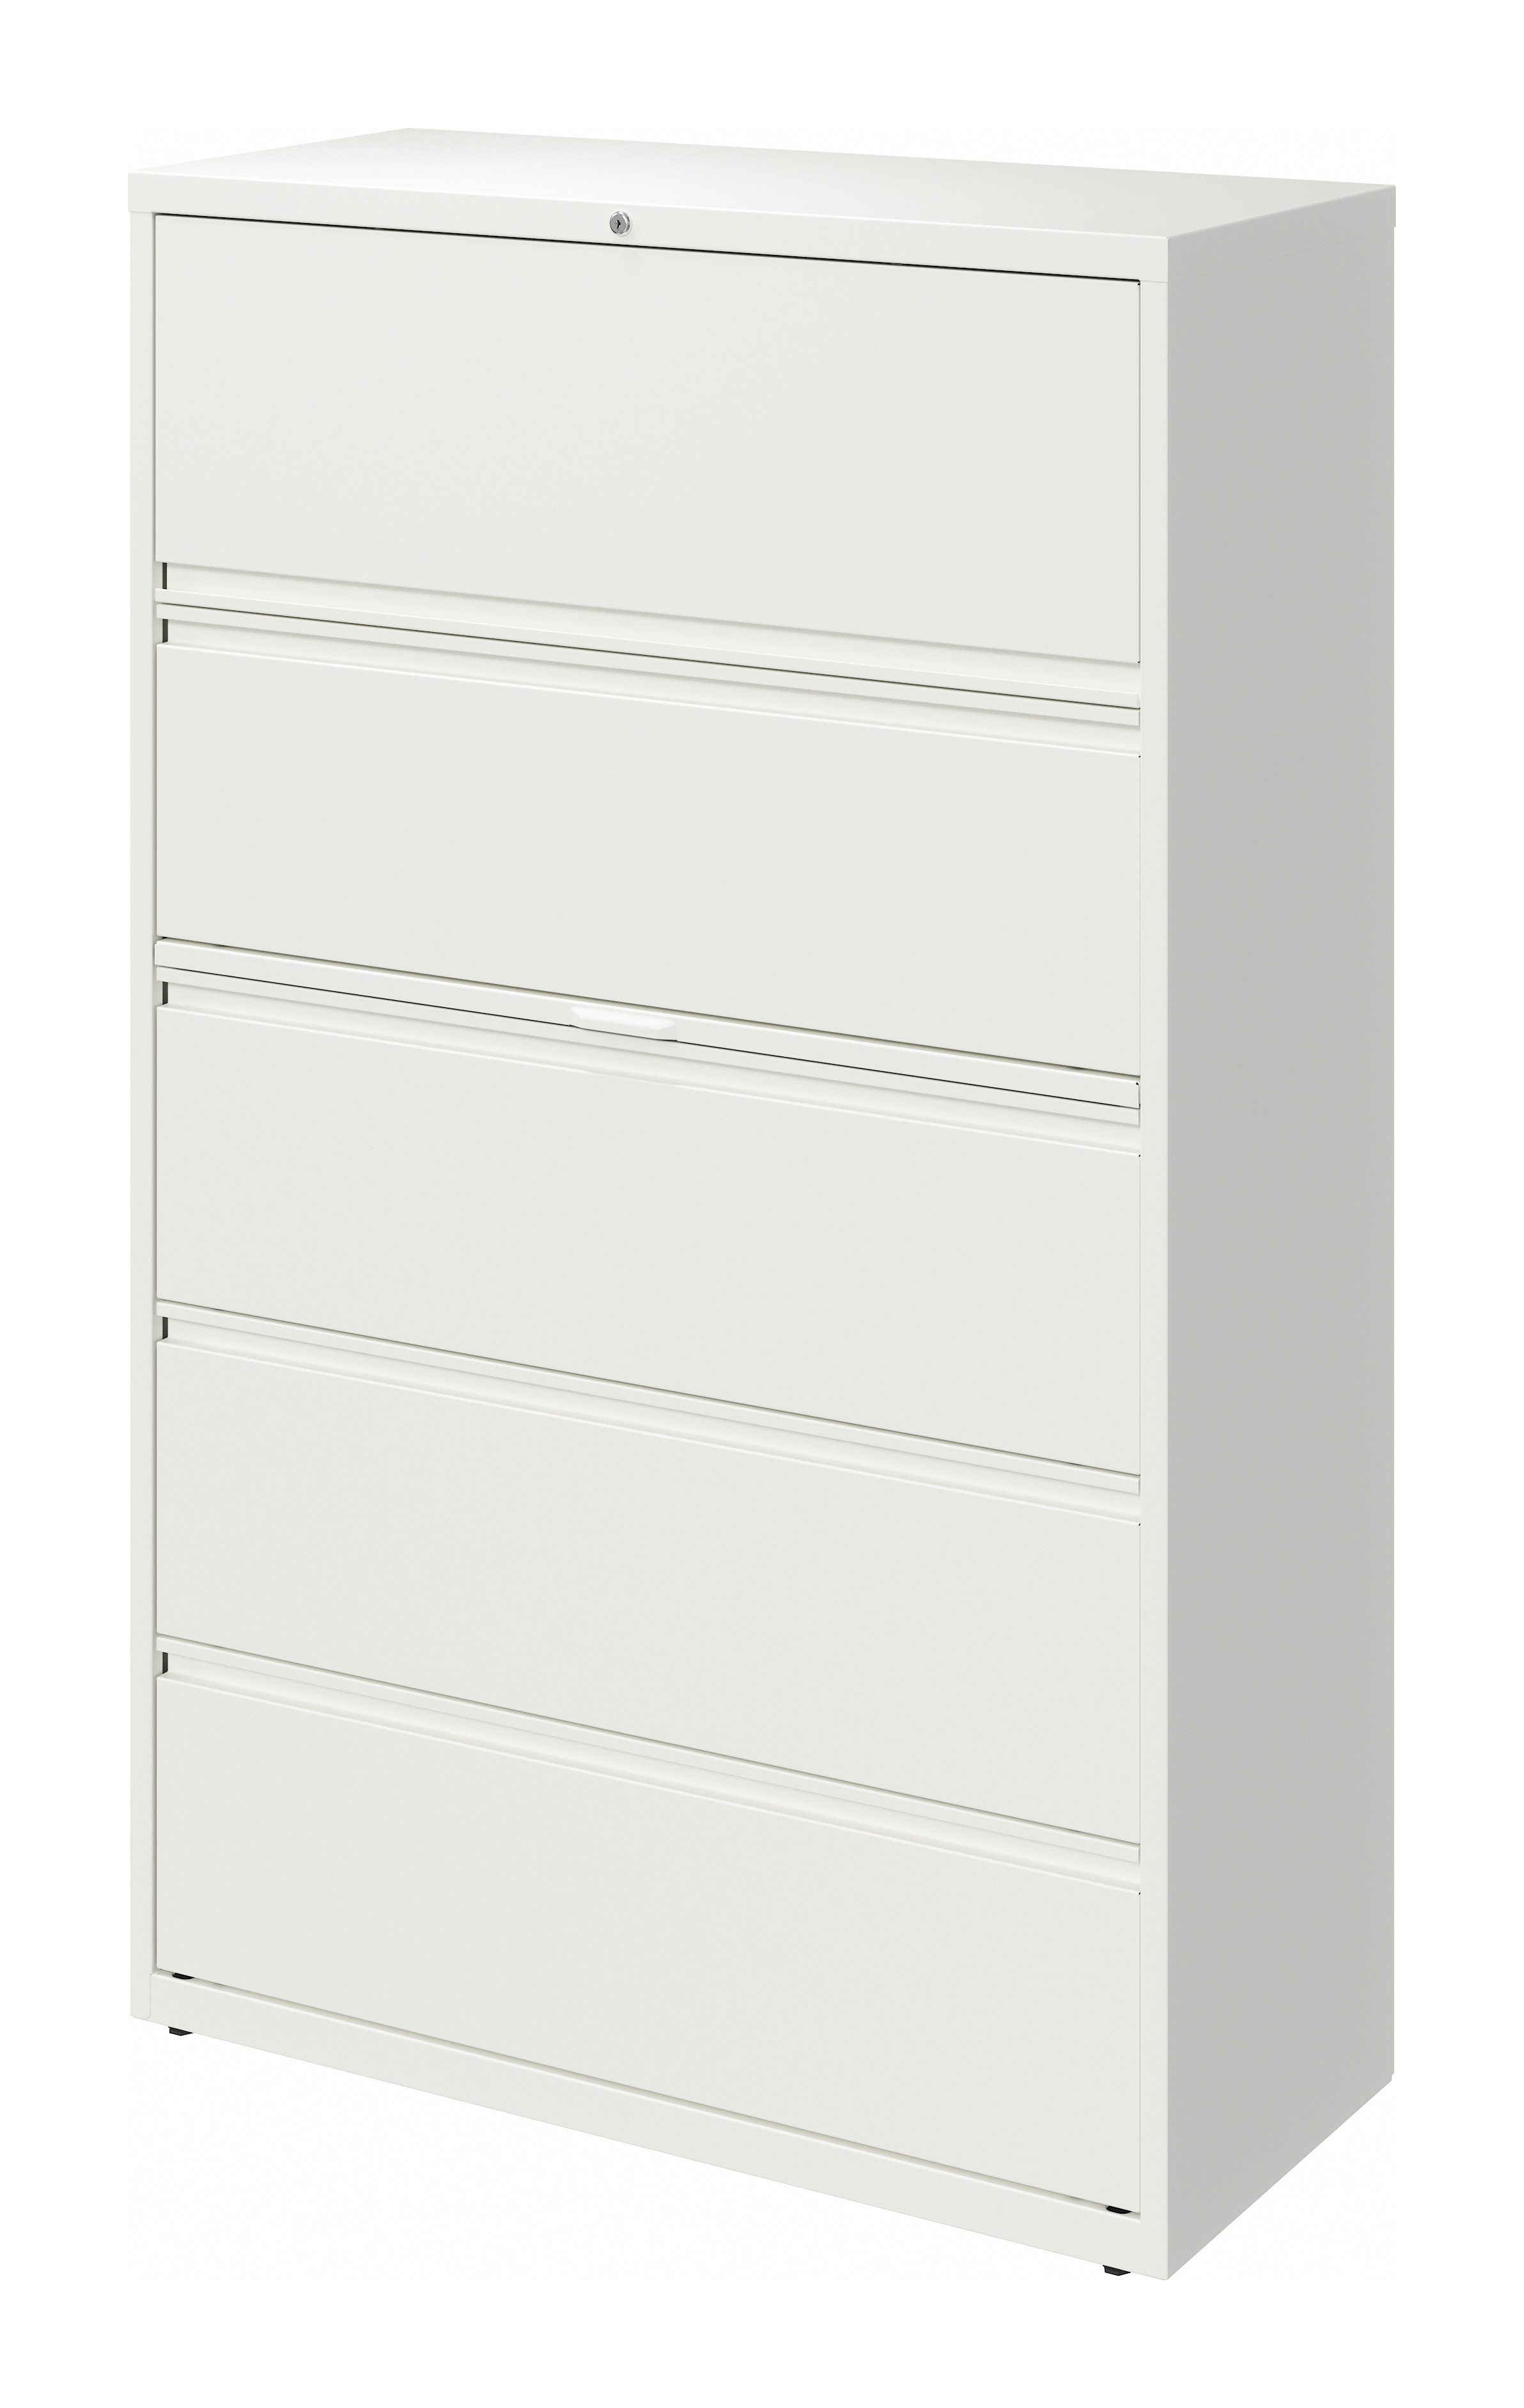 Hirsh 42 inch Wide 5 Drawer Metal Lateral File Cabinet for Home and Office, Holds Letter, Legal and A4 Hanging Folders, White - image 3 of 4